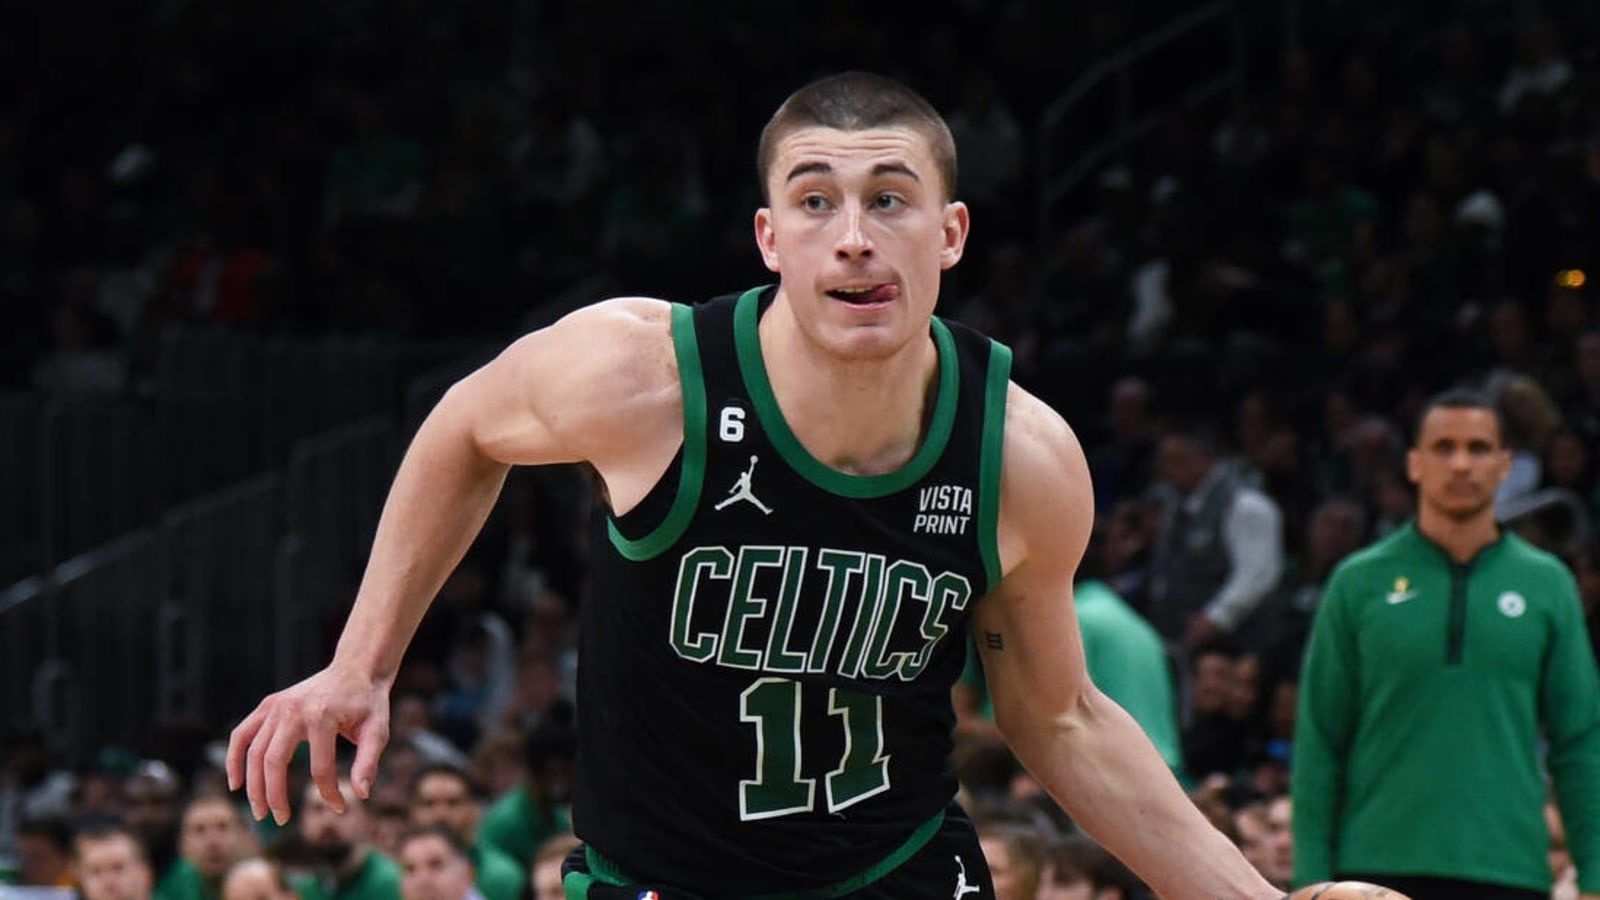 Celtics agree to four-year extension with young guard